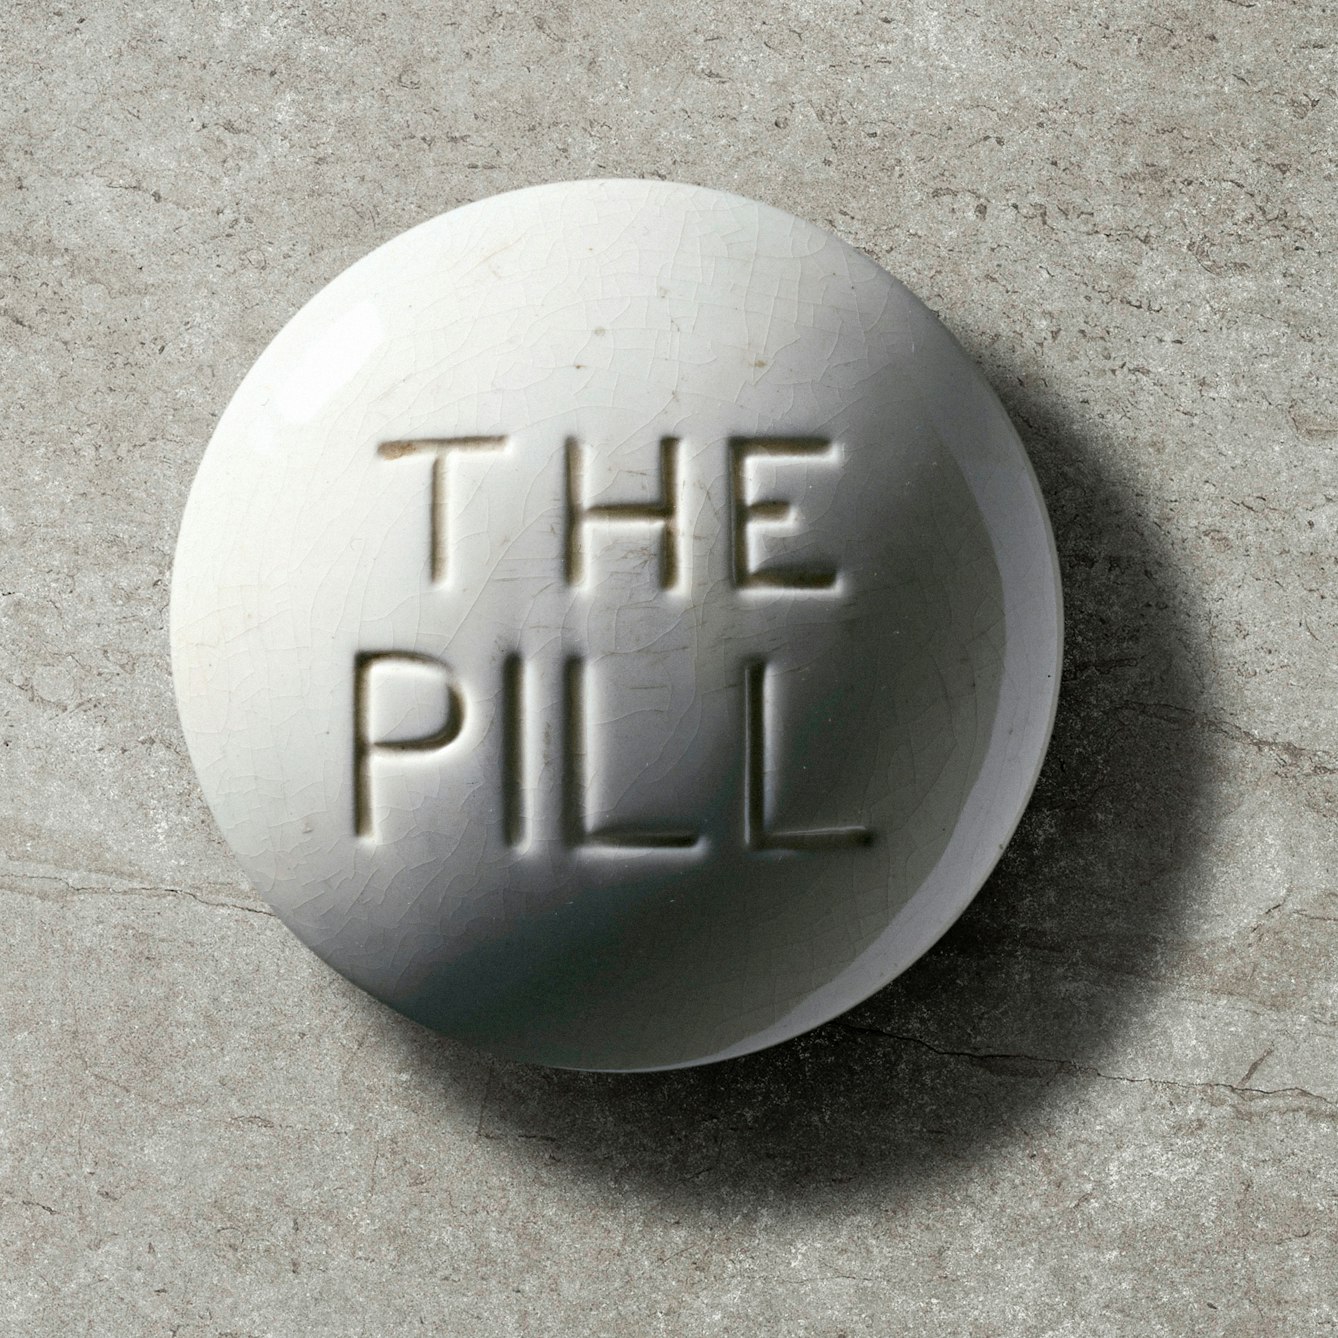 Photograph of a contraceptive pill model, Europe, c. 1970. White crackled glaze, with debossed "THE PILL" text in centre, on a grey concrete textured background.